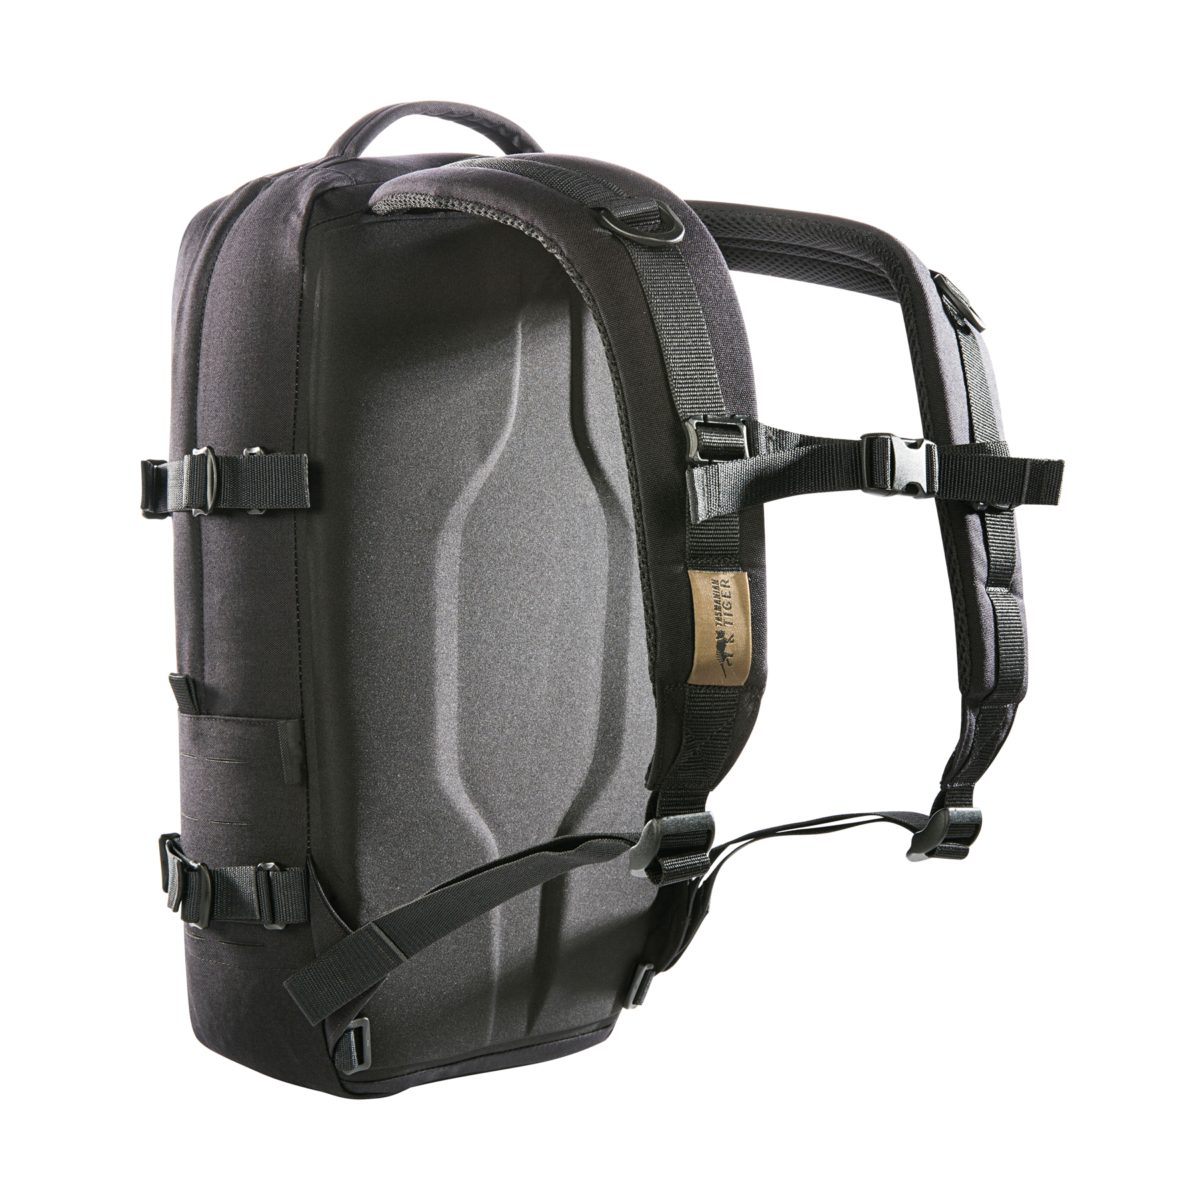 TT Modular Daypack L showing Thermo Mold Carrying System.